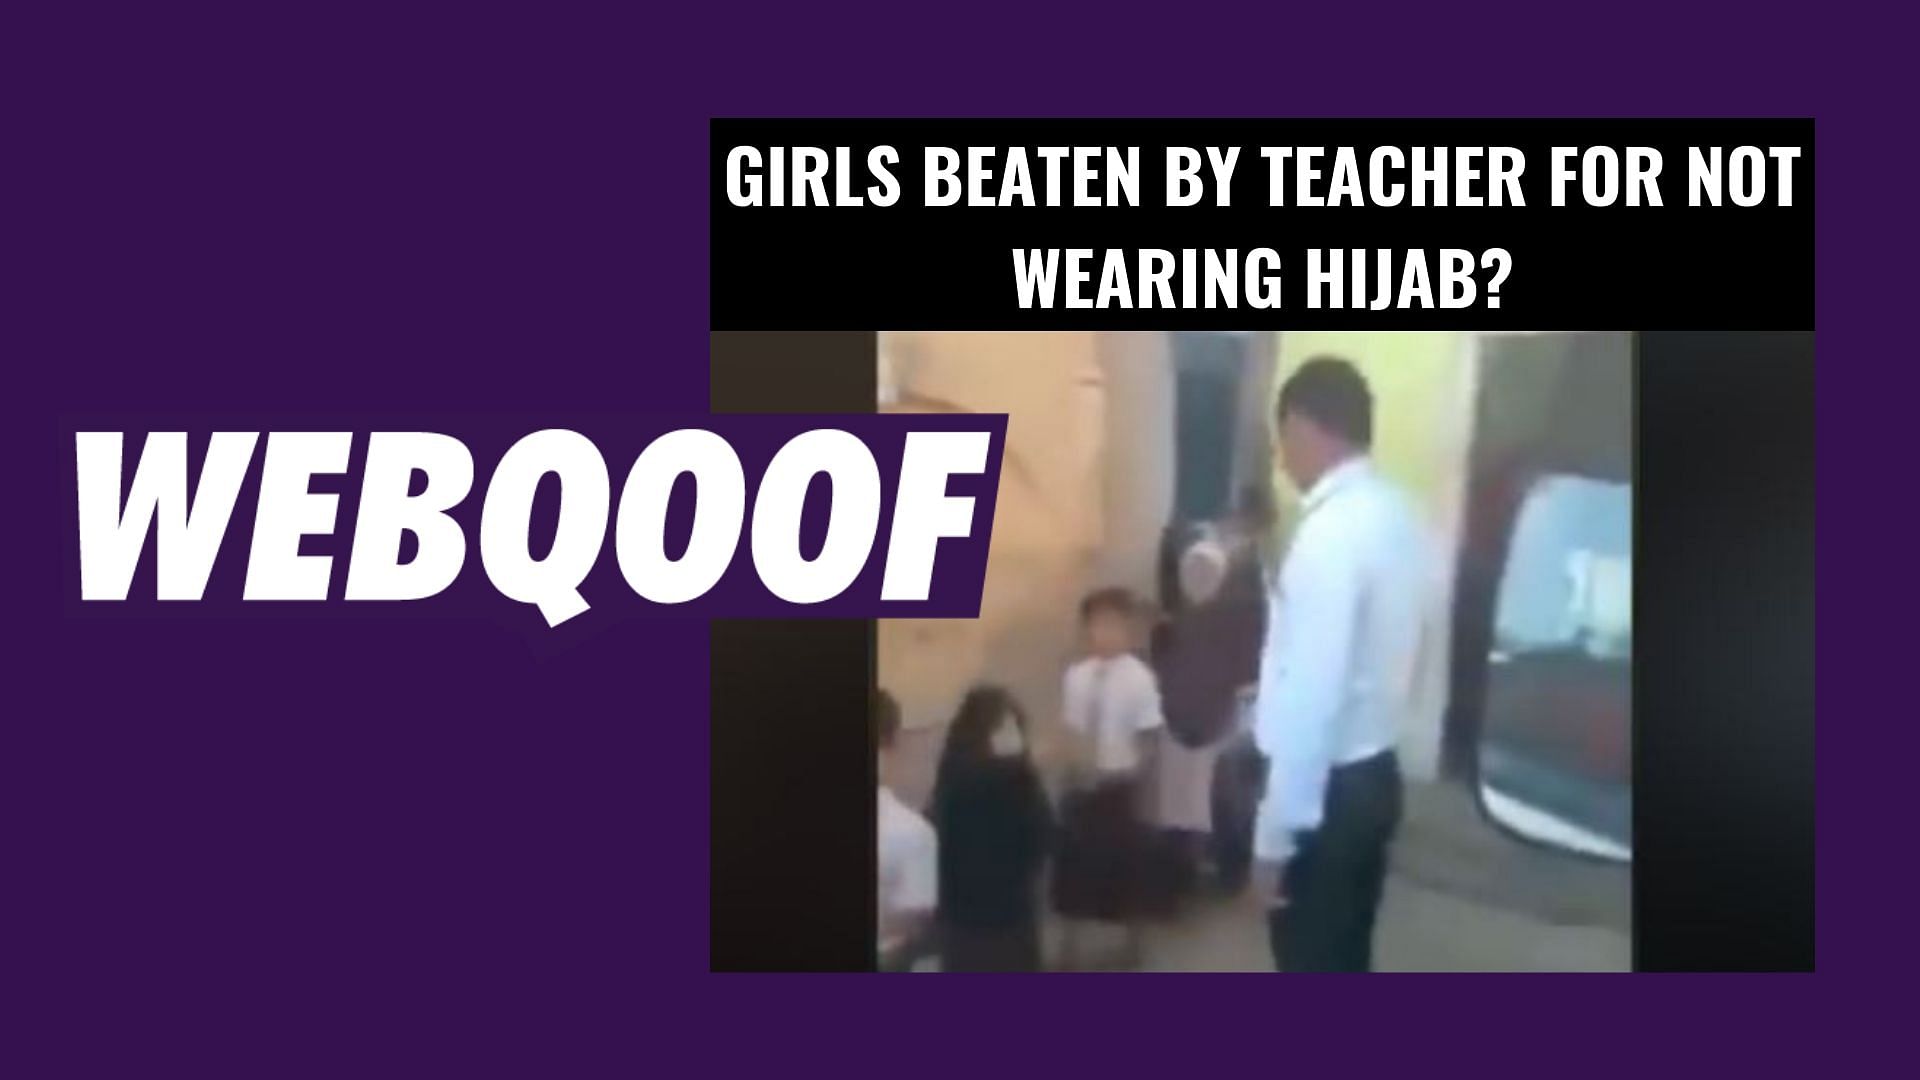 A video of a man hitting girl students has gone viral on social media with claims that the man is ‘punishing’ the girls for not wearing hijab.